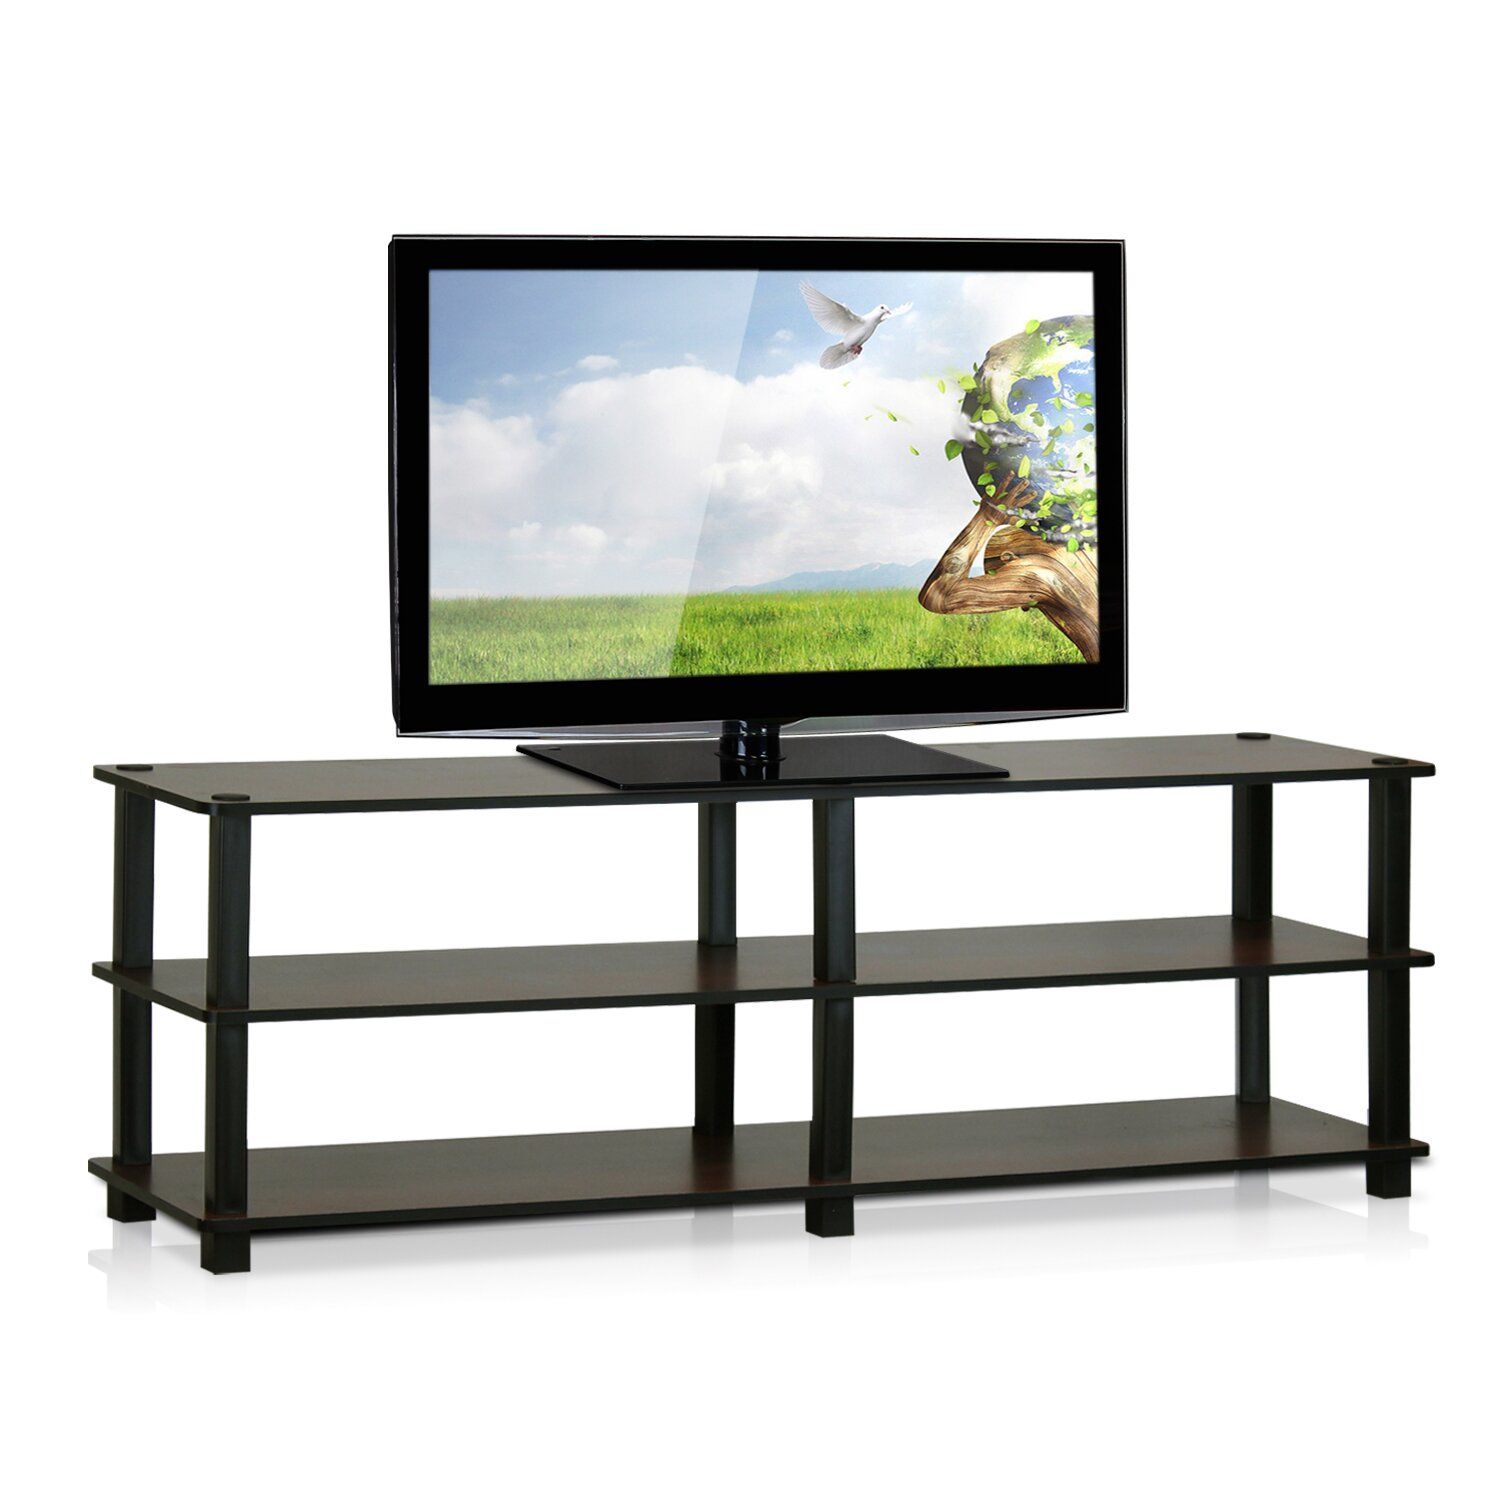 Furinno Furinno Turn S Tube Tv Stand & Reviews | Wayfair In Narrow Tv Stands For Flat Screens (View 10 of 15)